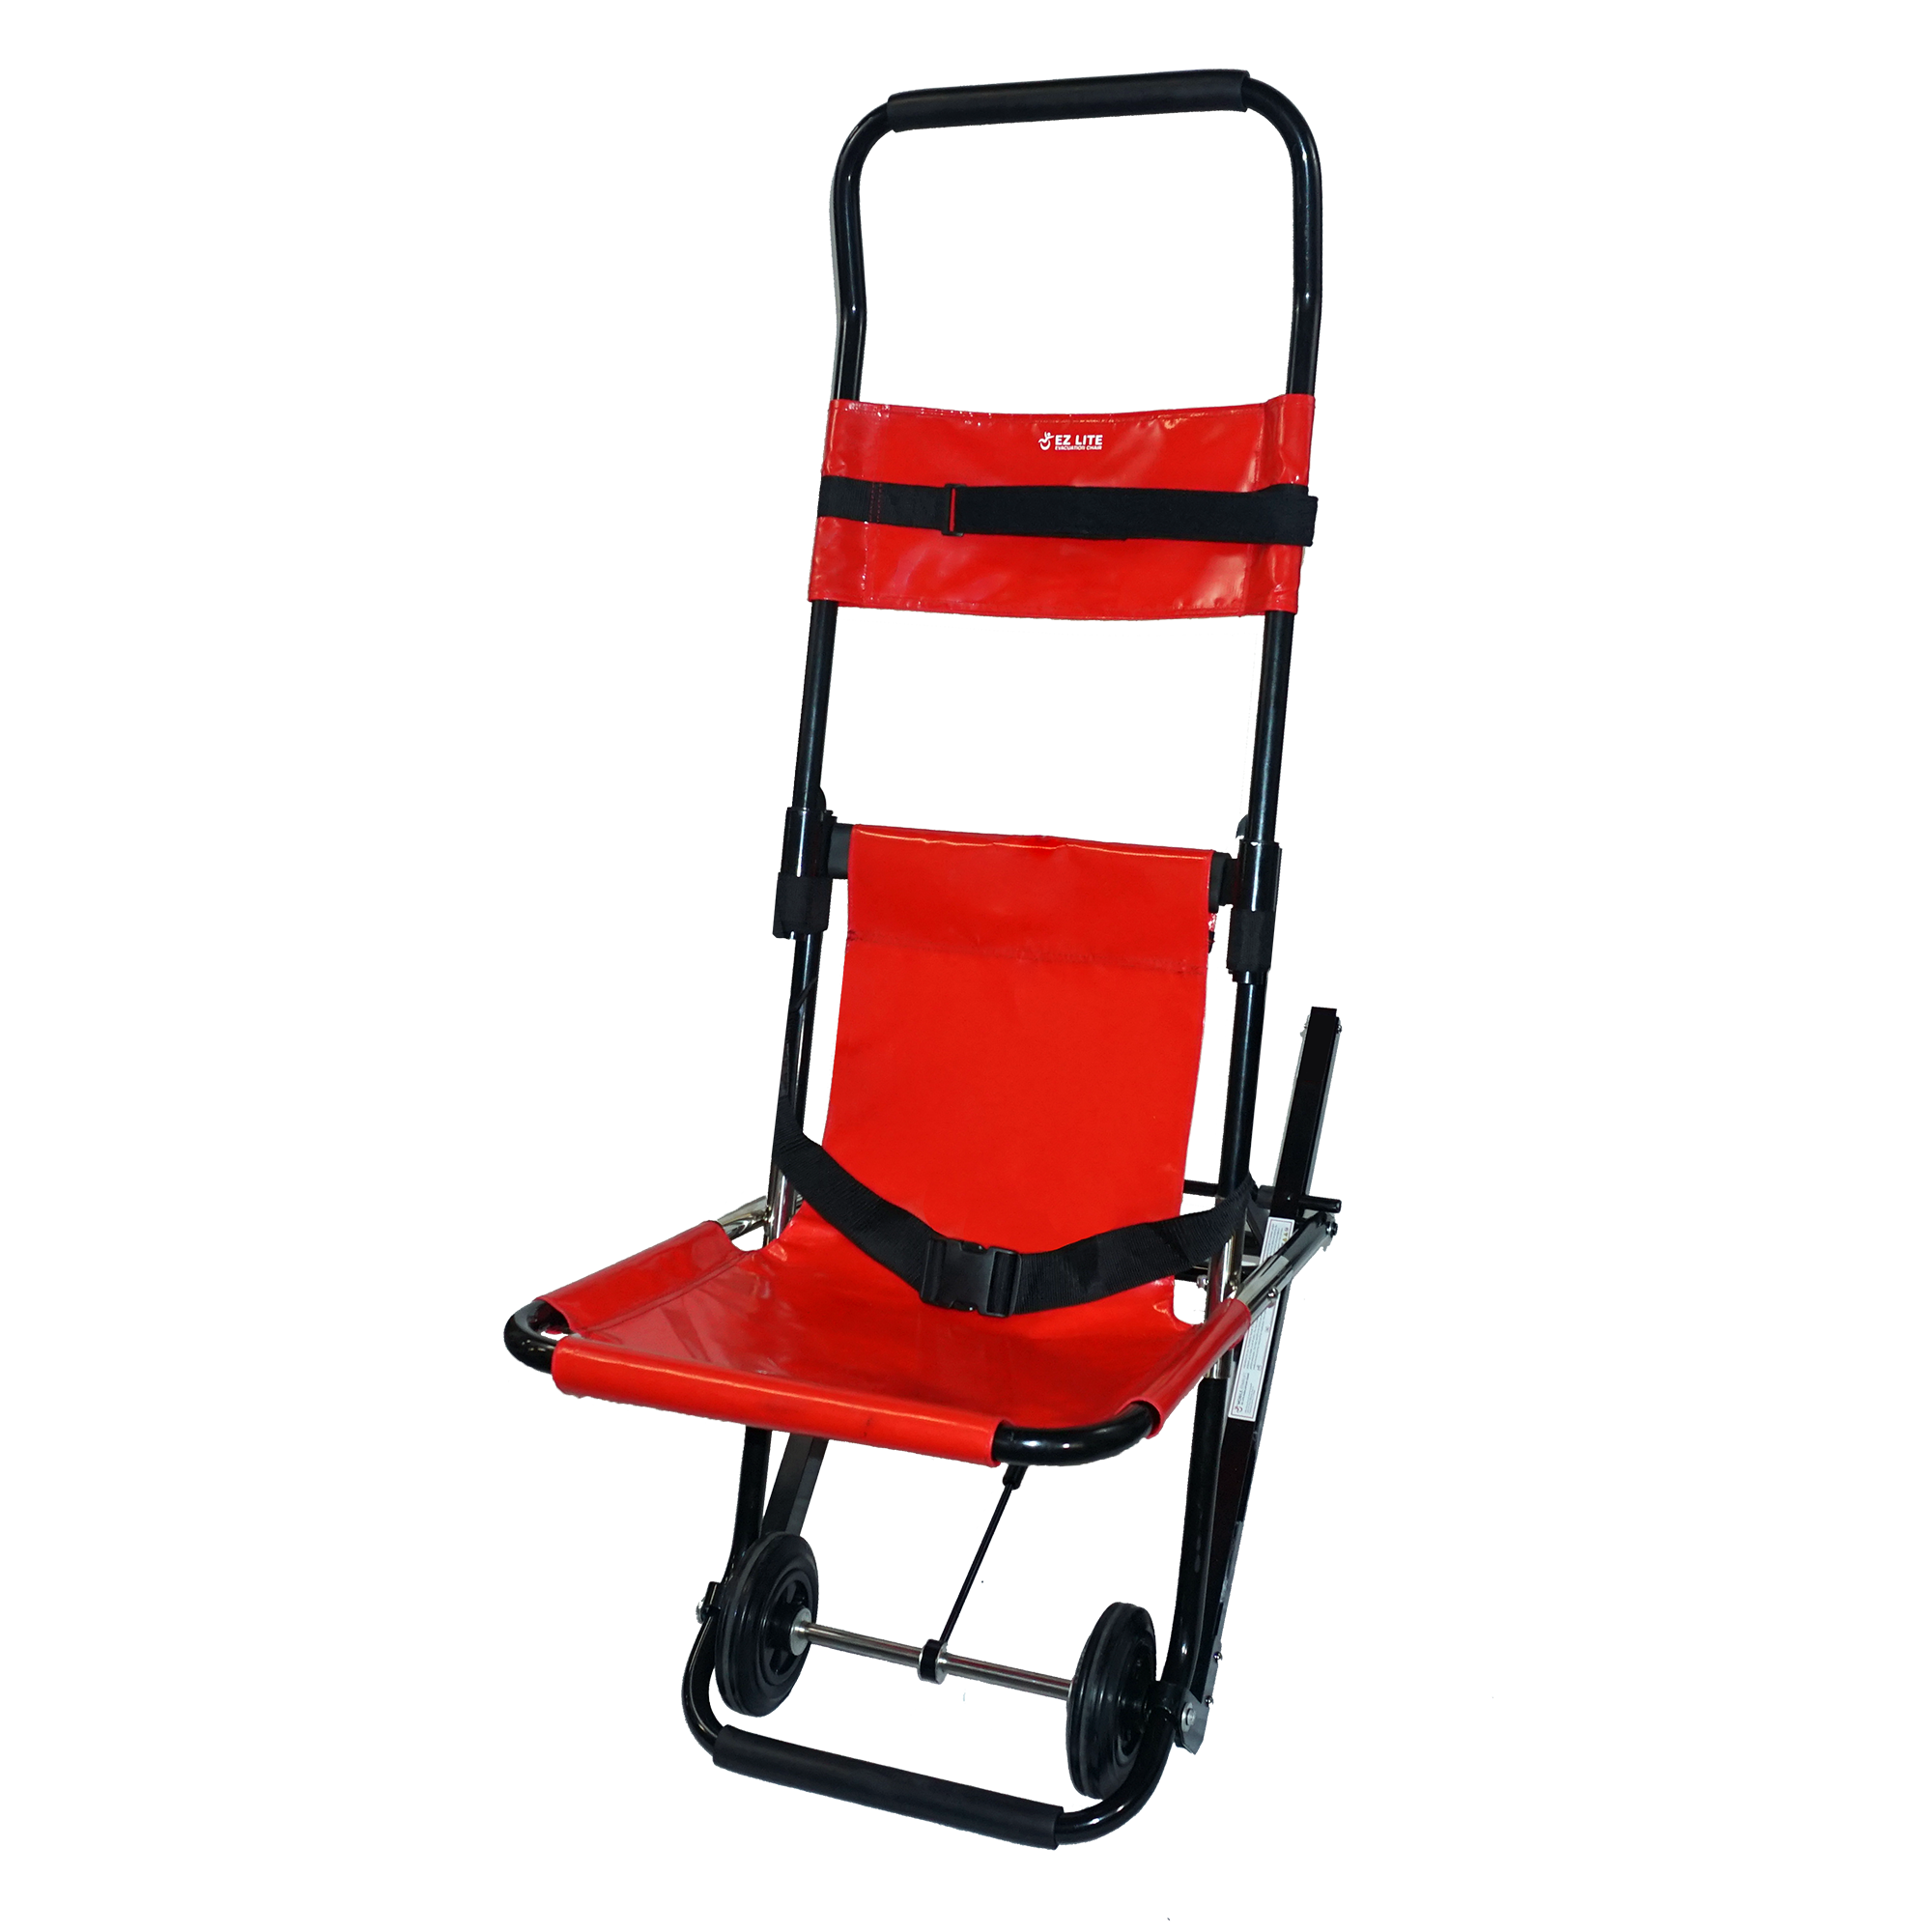 Mobile Stairlift EZ LITE Evacuation Stair Chair